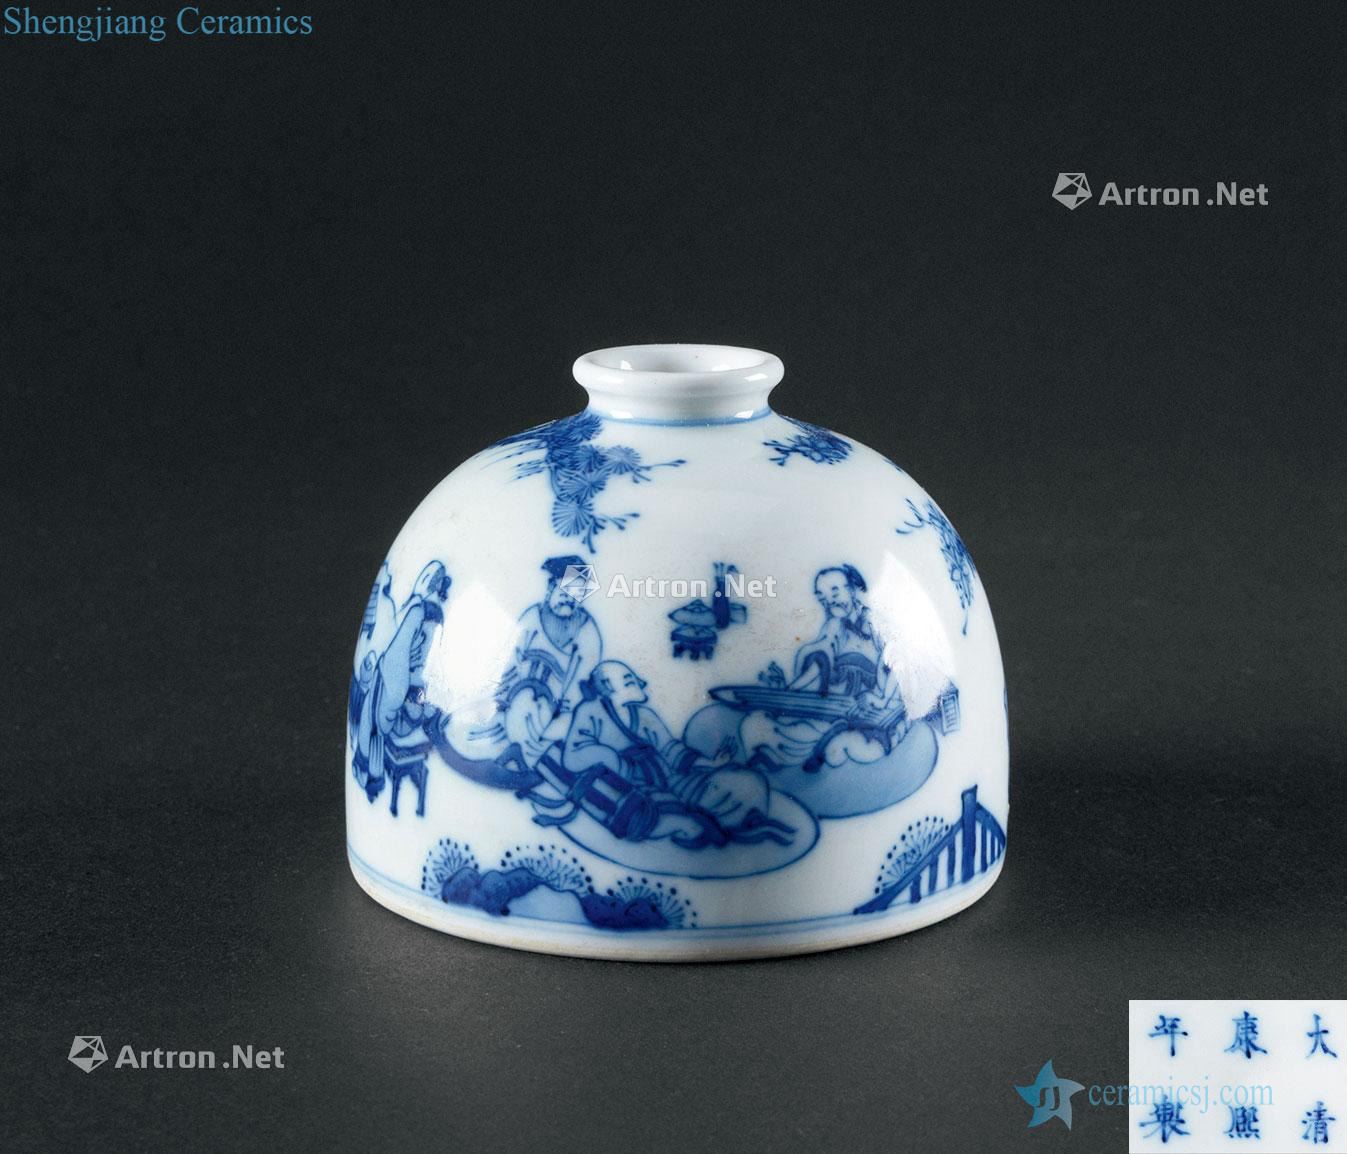 In the qing dynasty (1644-1911) grain white statue of blue and white characters